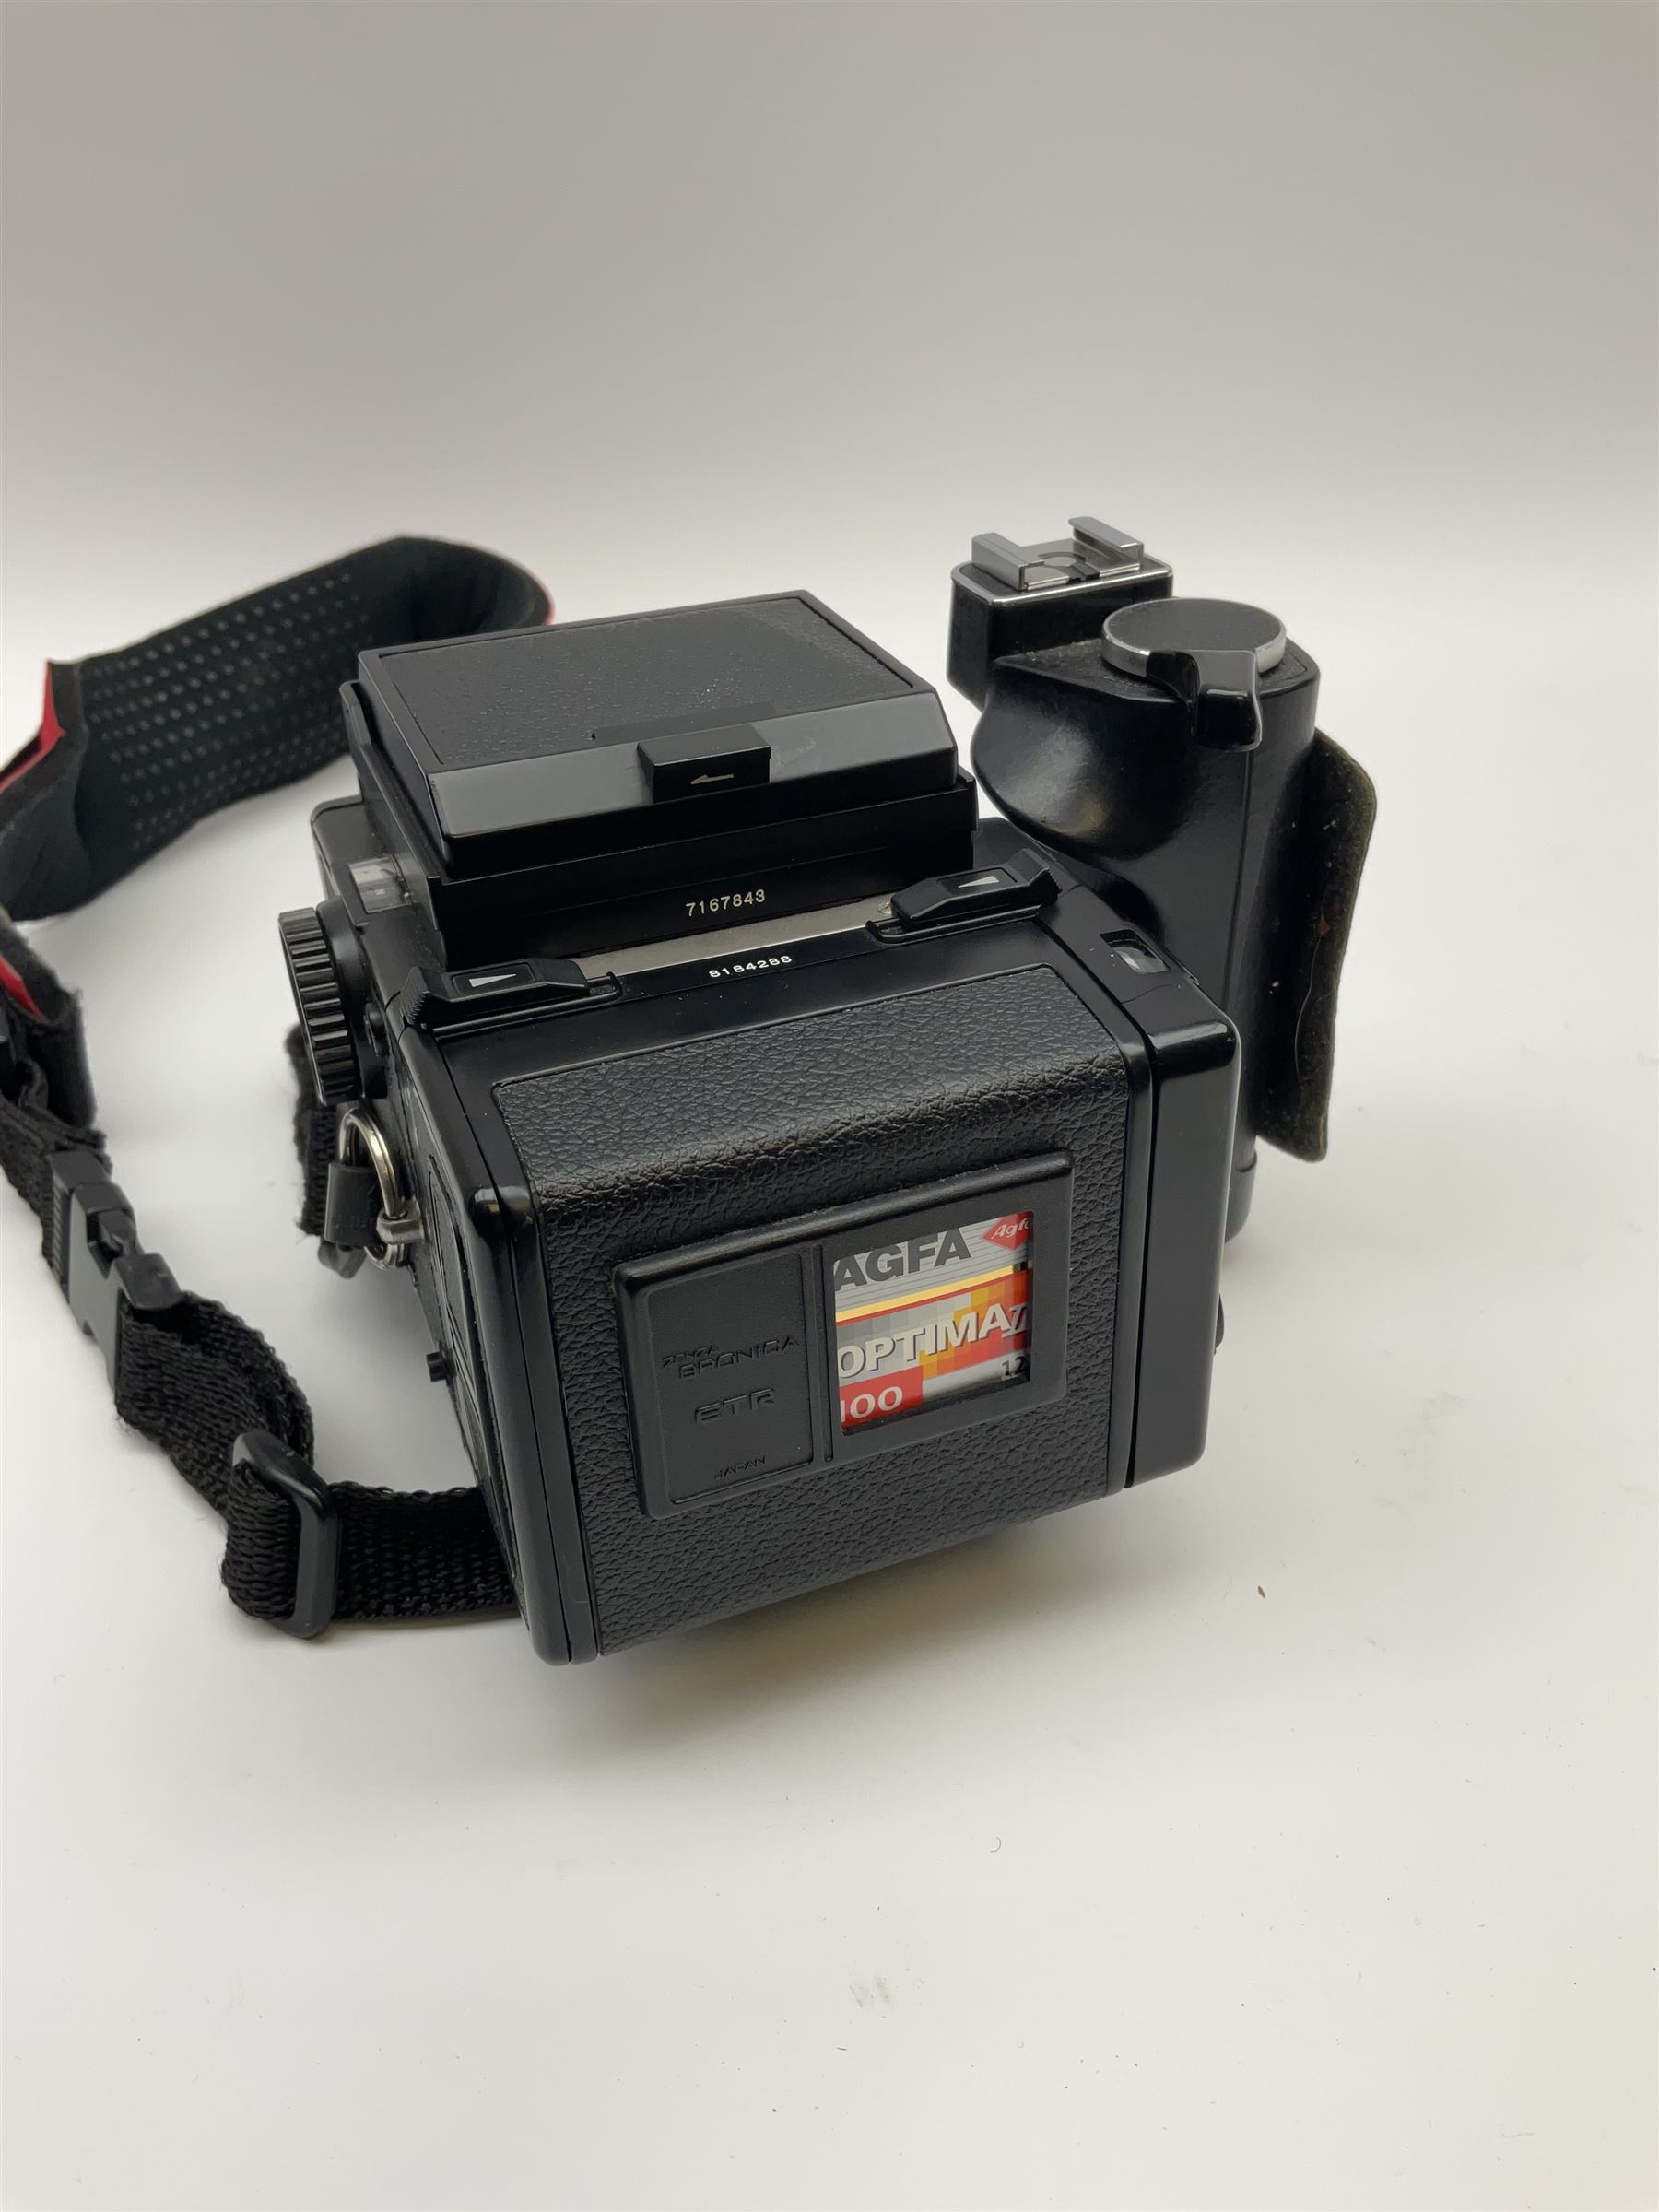 Zenza Bronica ETRS camera, with 'Zenzanon EII 1:2.8 f75mm' lens and ETR